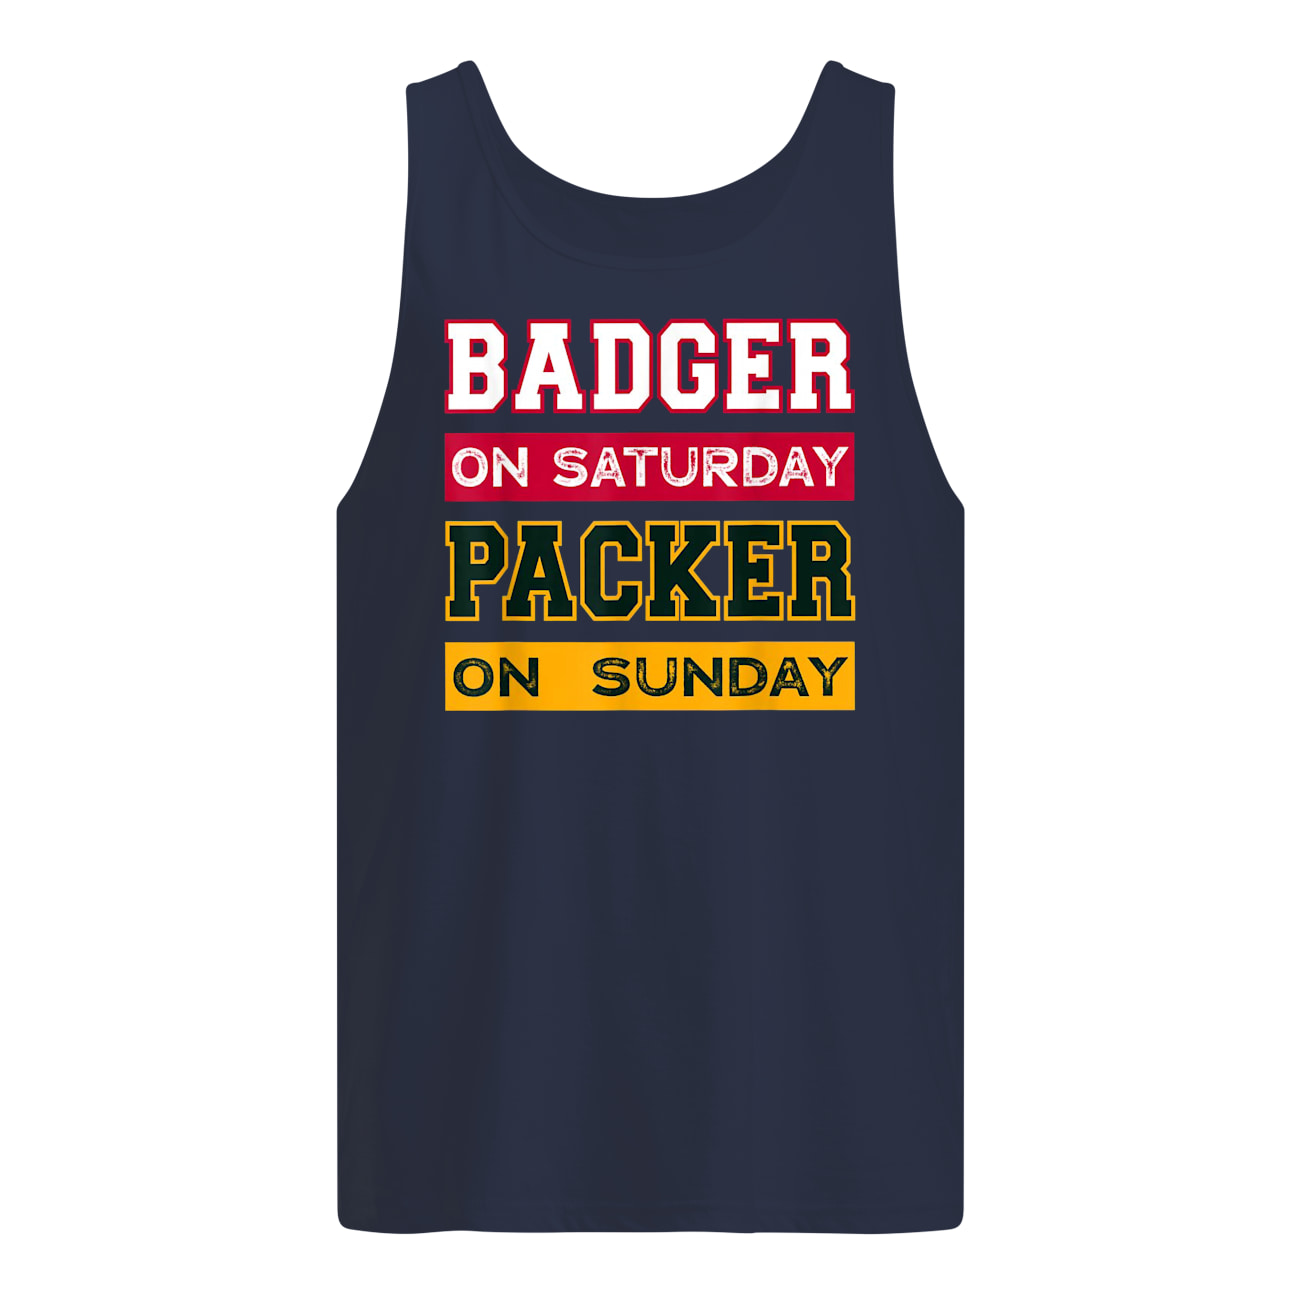 Badger on saturday packer on sunday green bay packers tank top